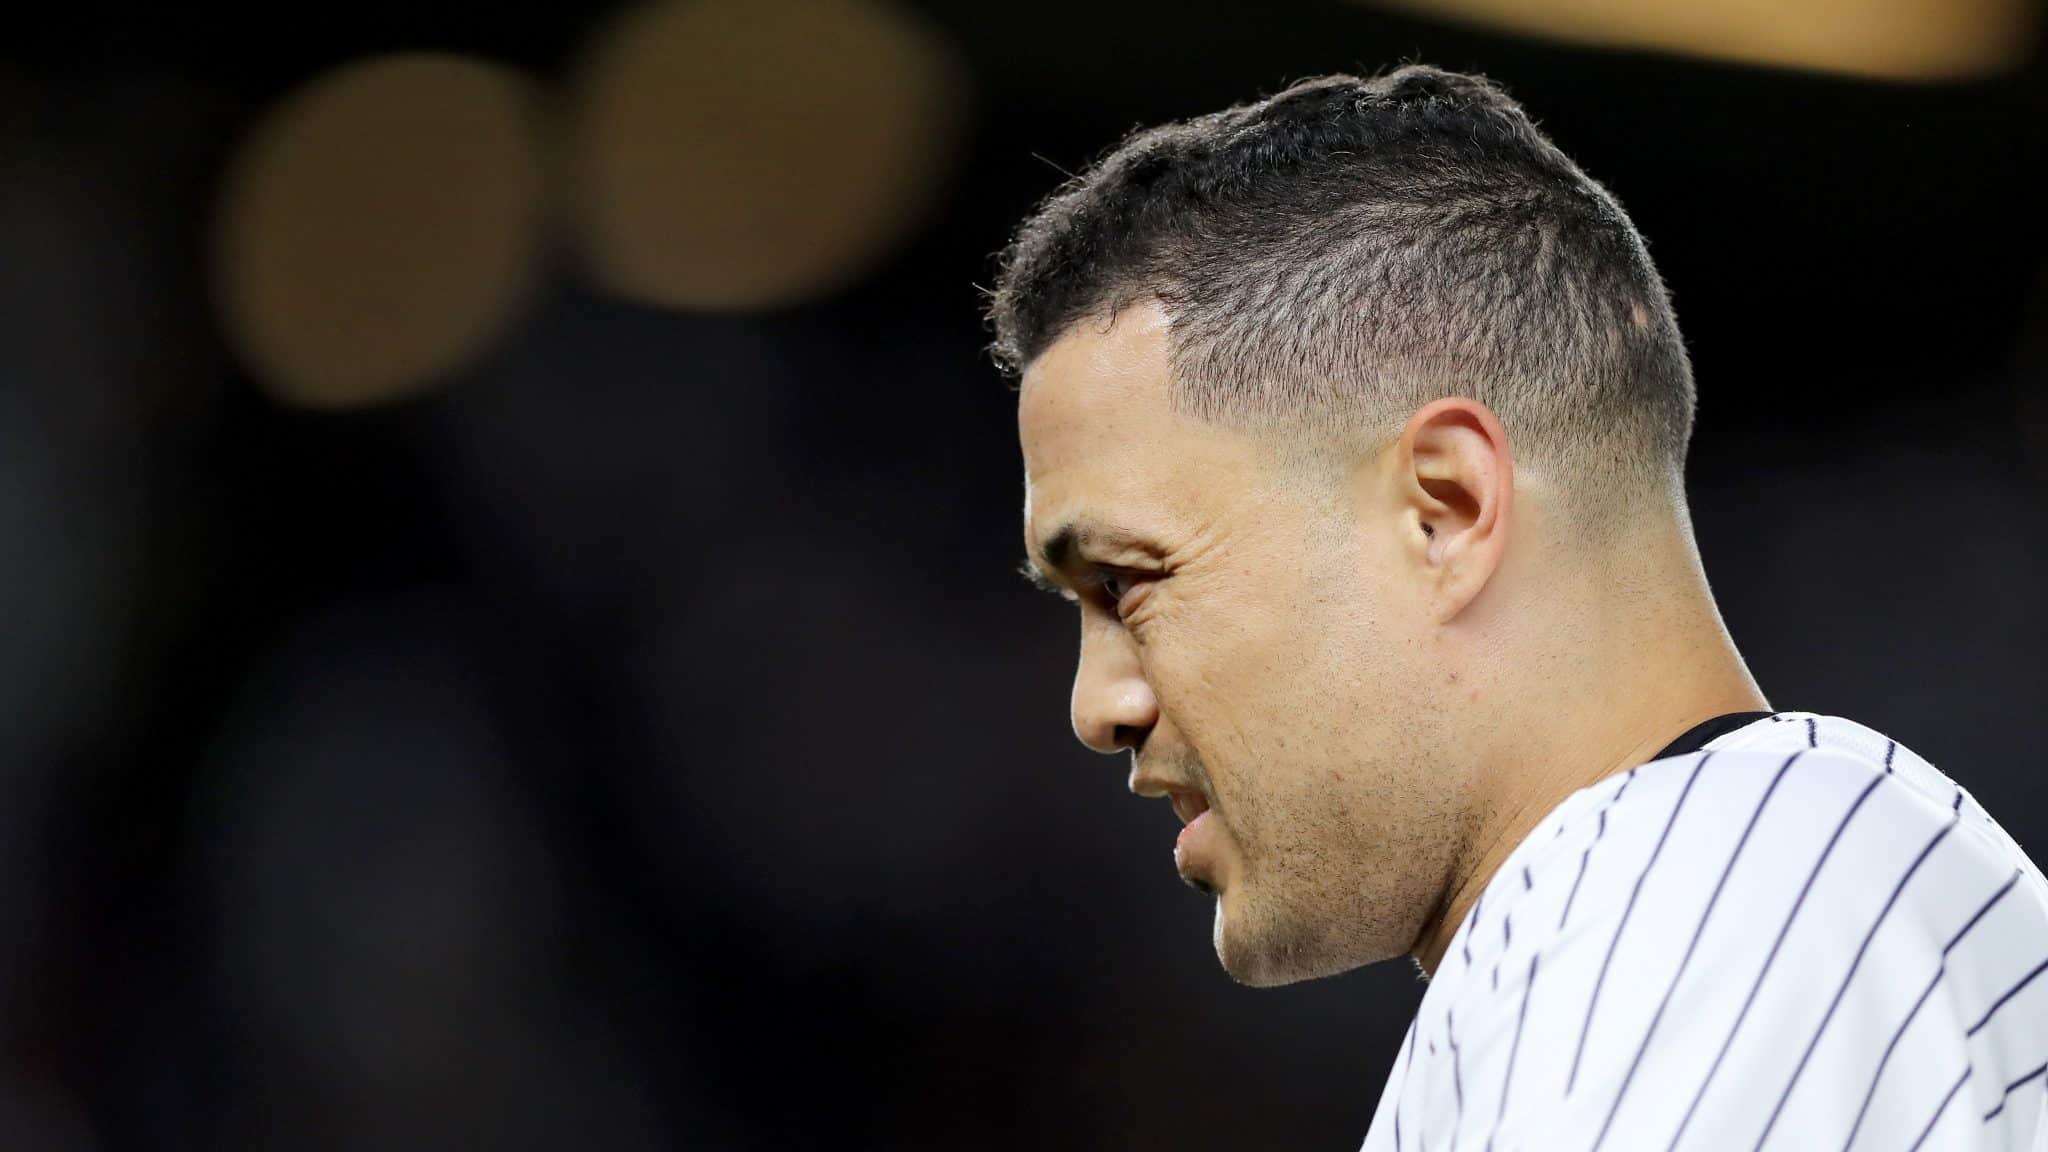 NEW YORK, NEW YORK - OCTOBER 04: Giancarlo Stanton #27 of the New York Yankees reacts after grounding out against the Minnesota Twins during the first inning in game one of the American League Division Series at Yankee Stadium on October 04, 2019 in New York City.